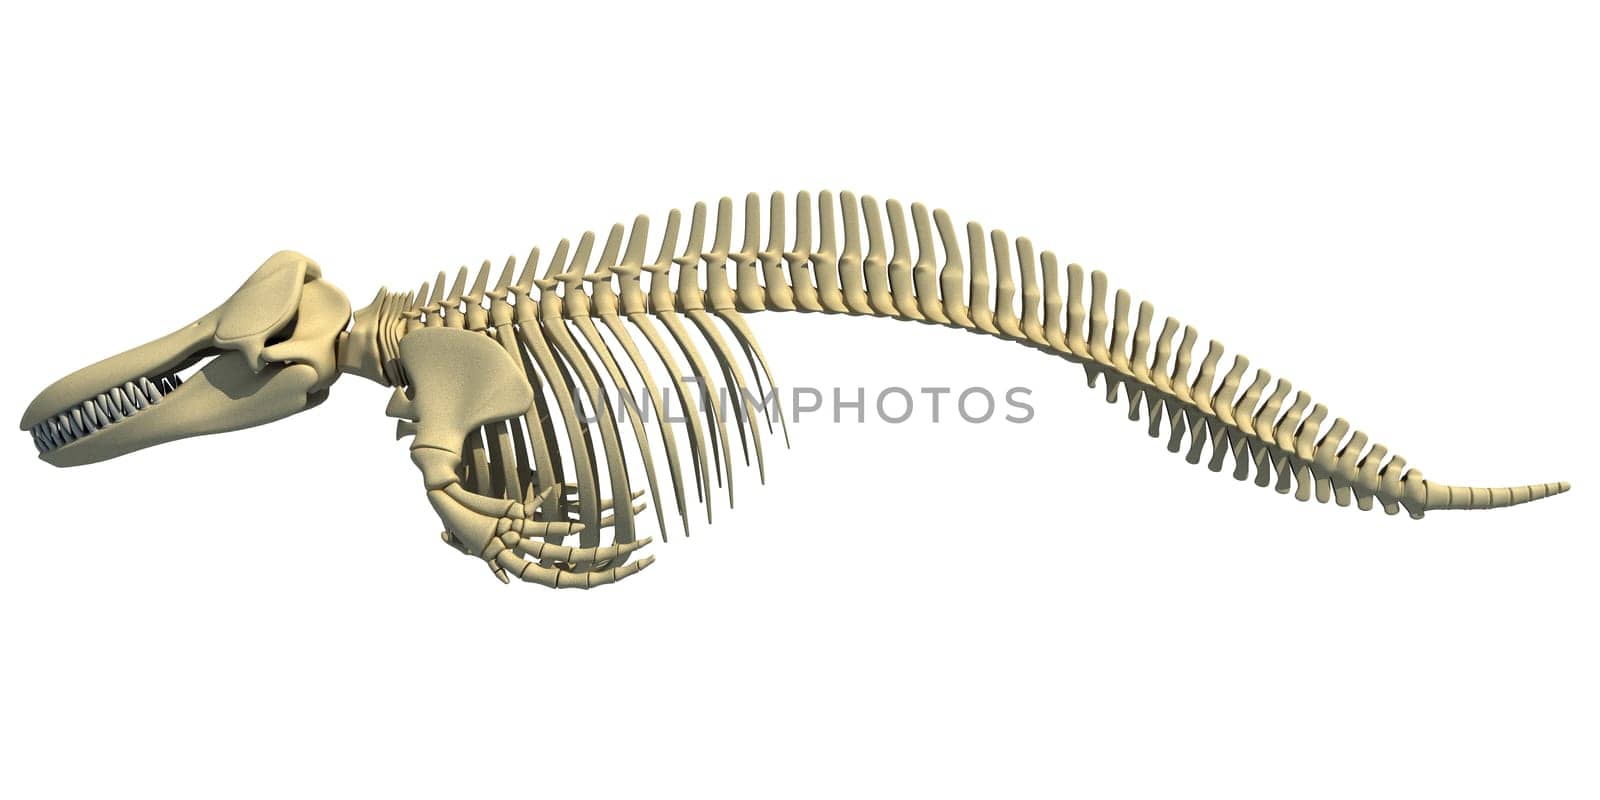 Killer Whale Orca Skeleton 3D rendering by 3DHorse